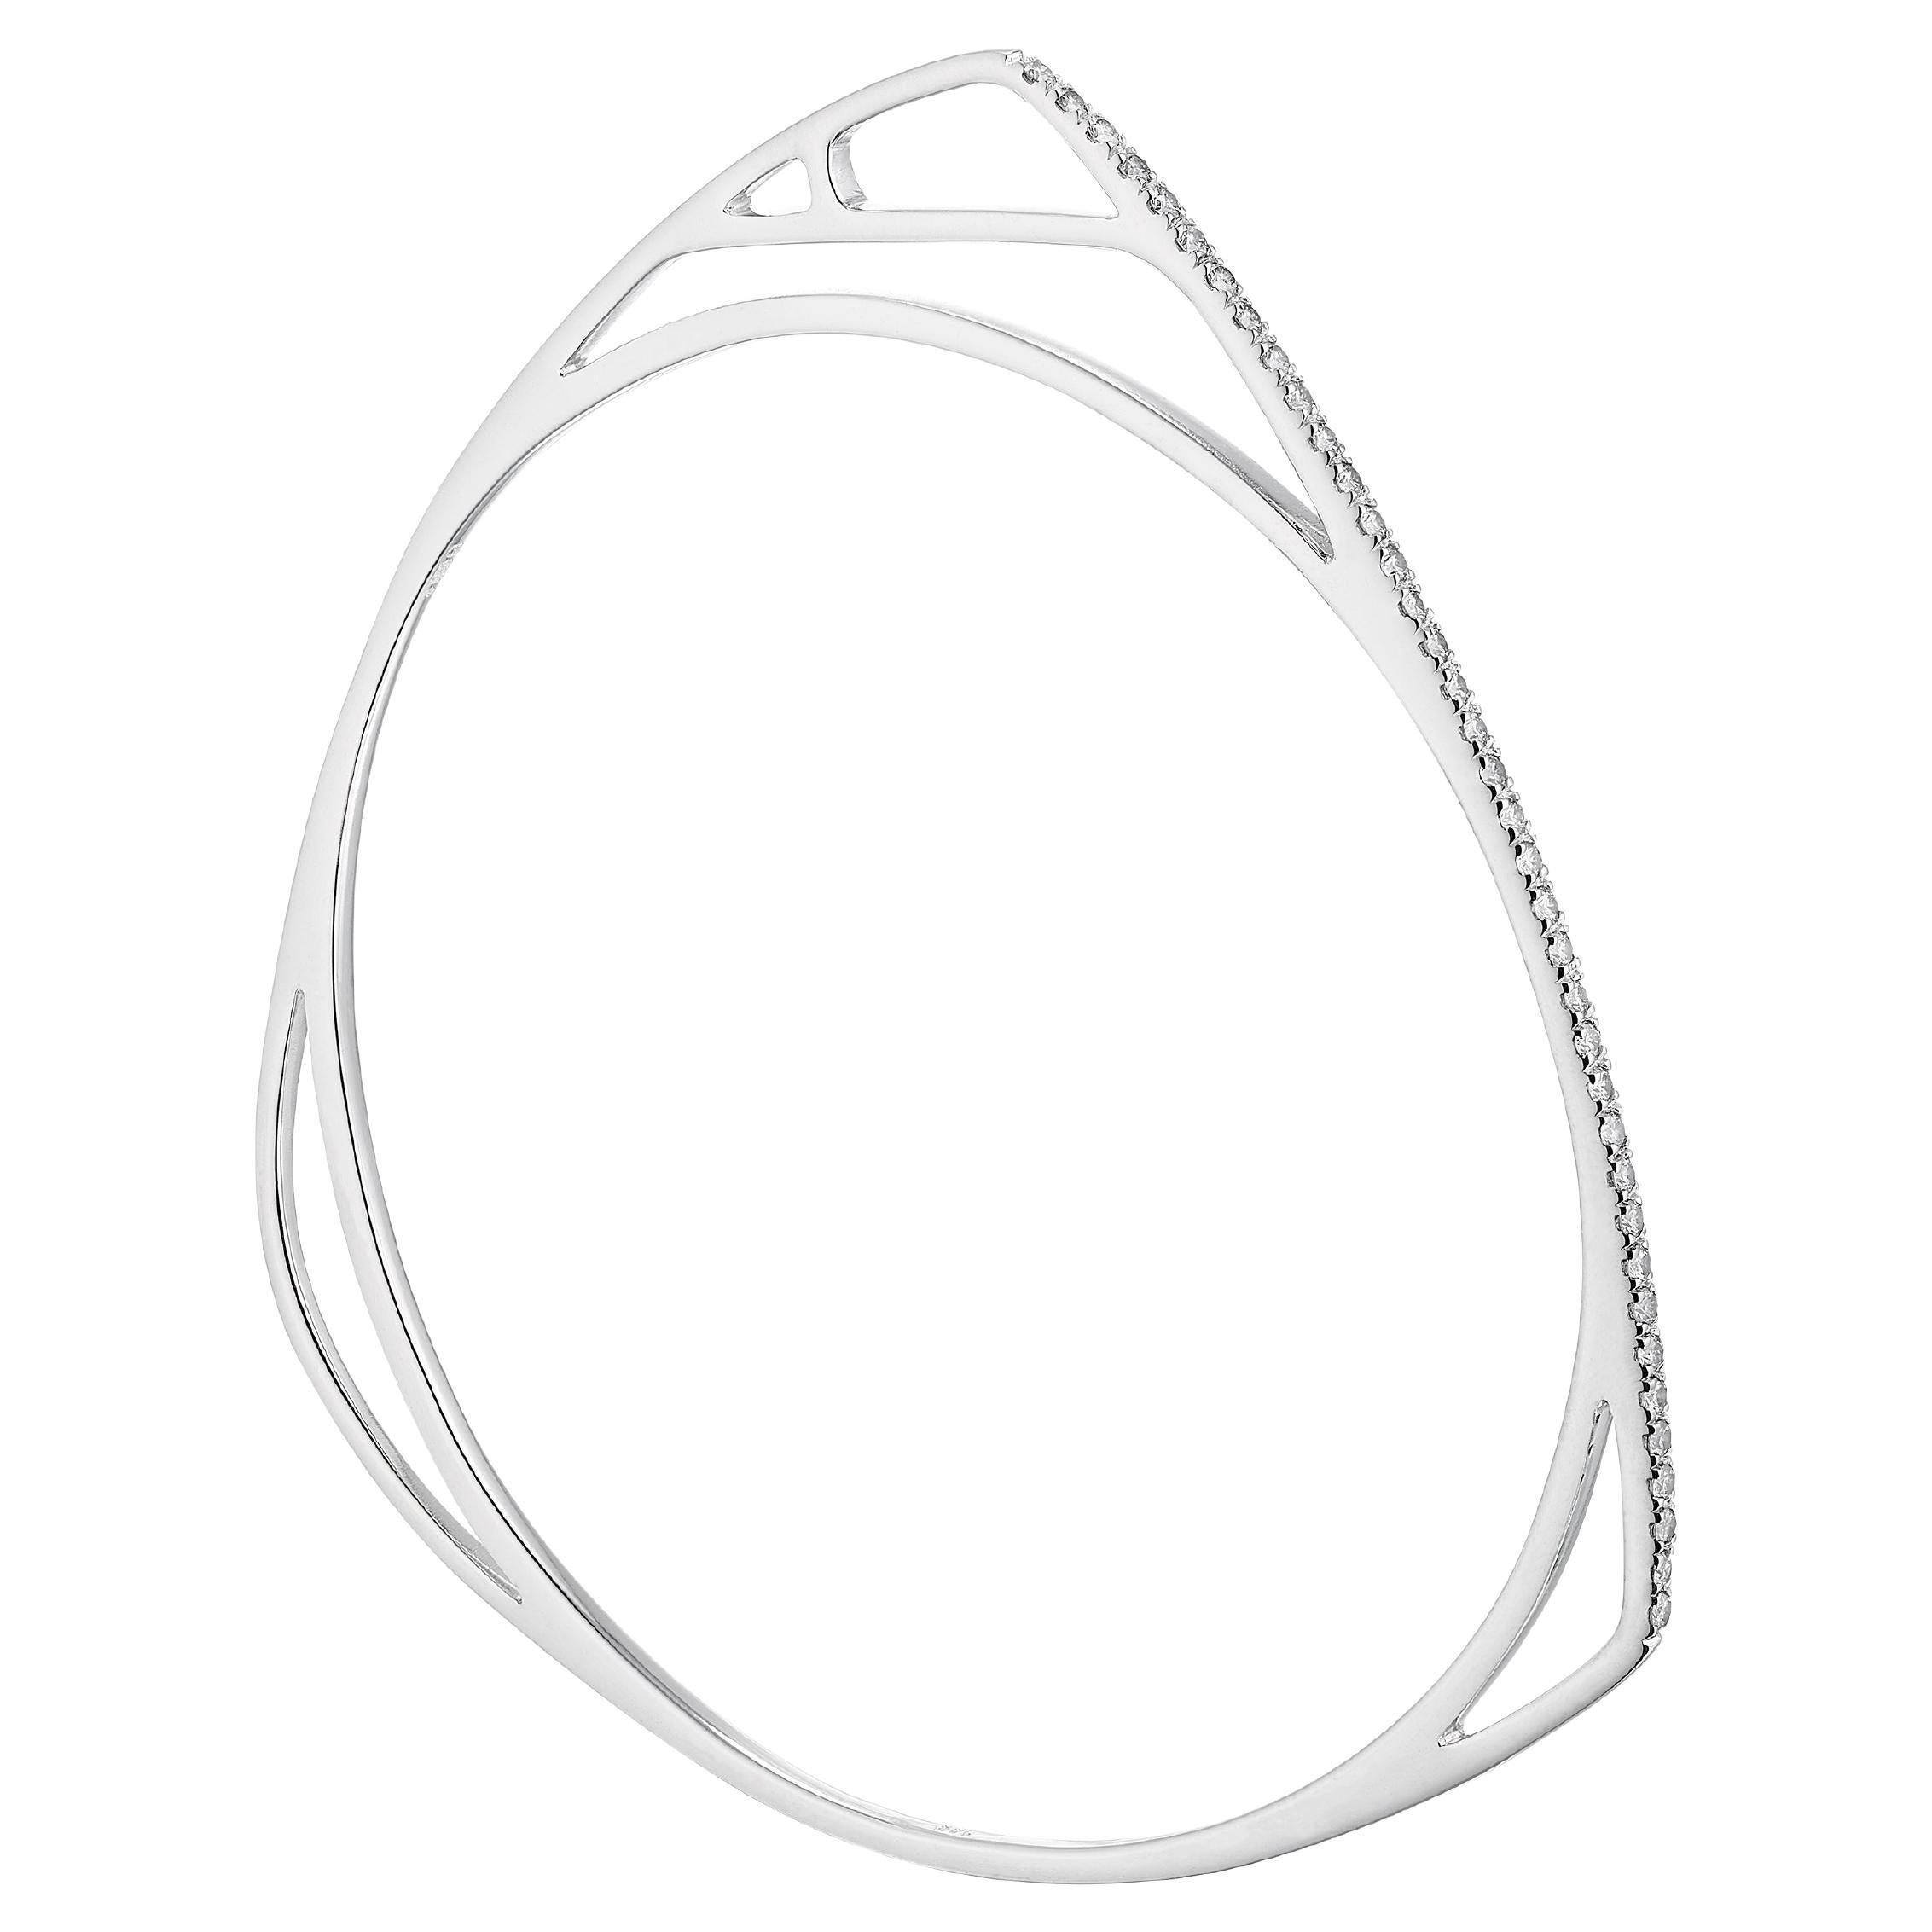 Anabela Chan Fine Sustainable Jewelry White Gold Diamond Morpho Bangle 5 Size S For Sale